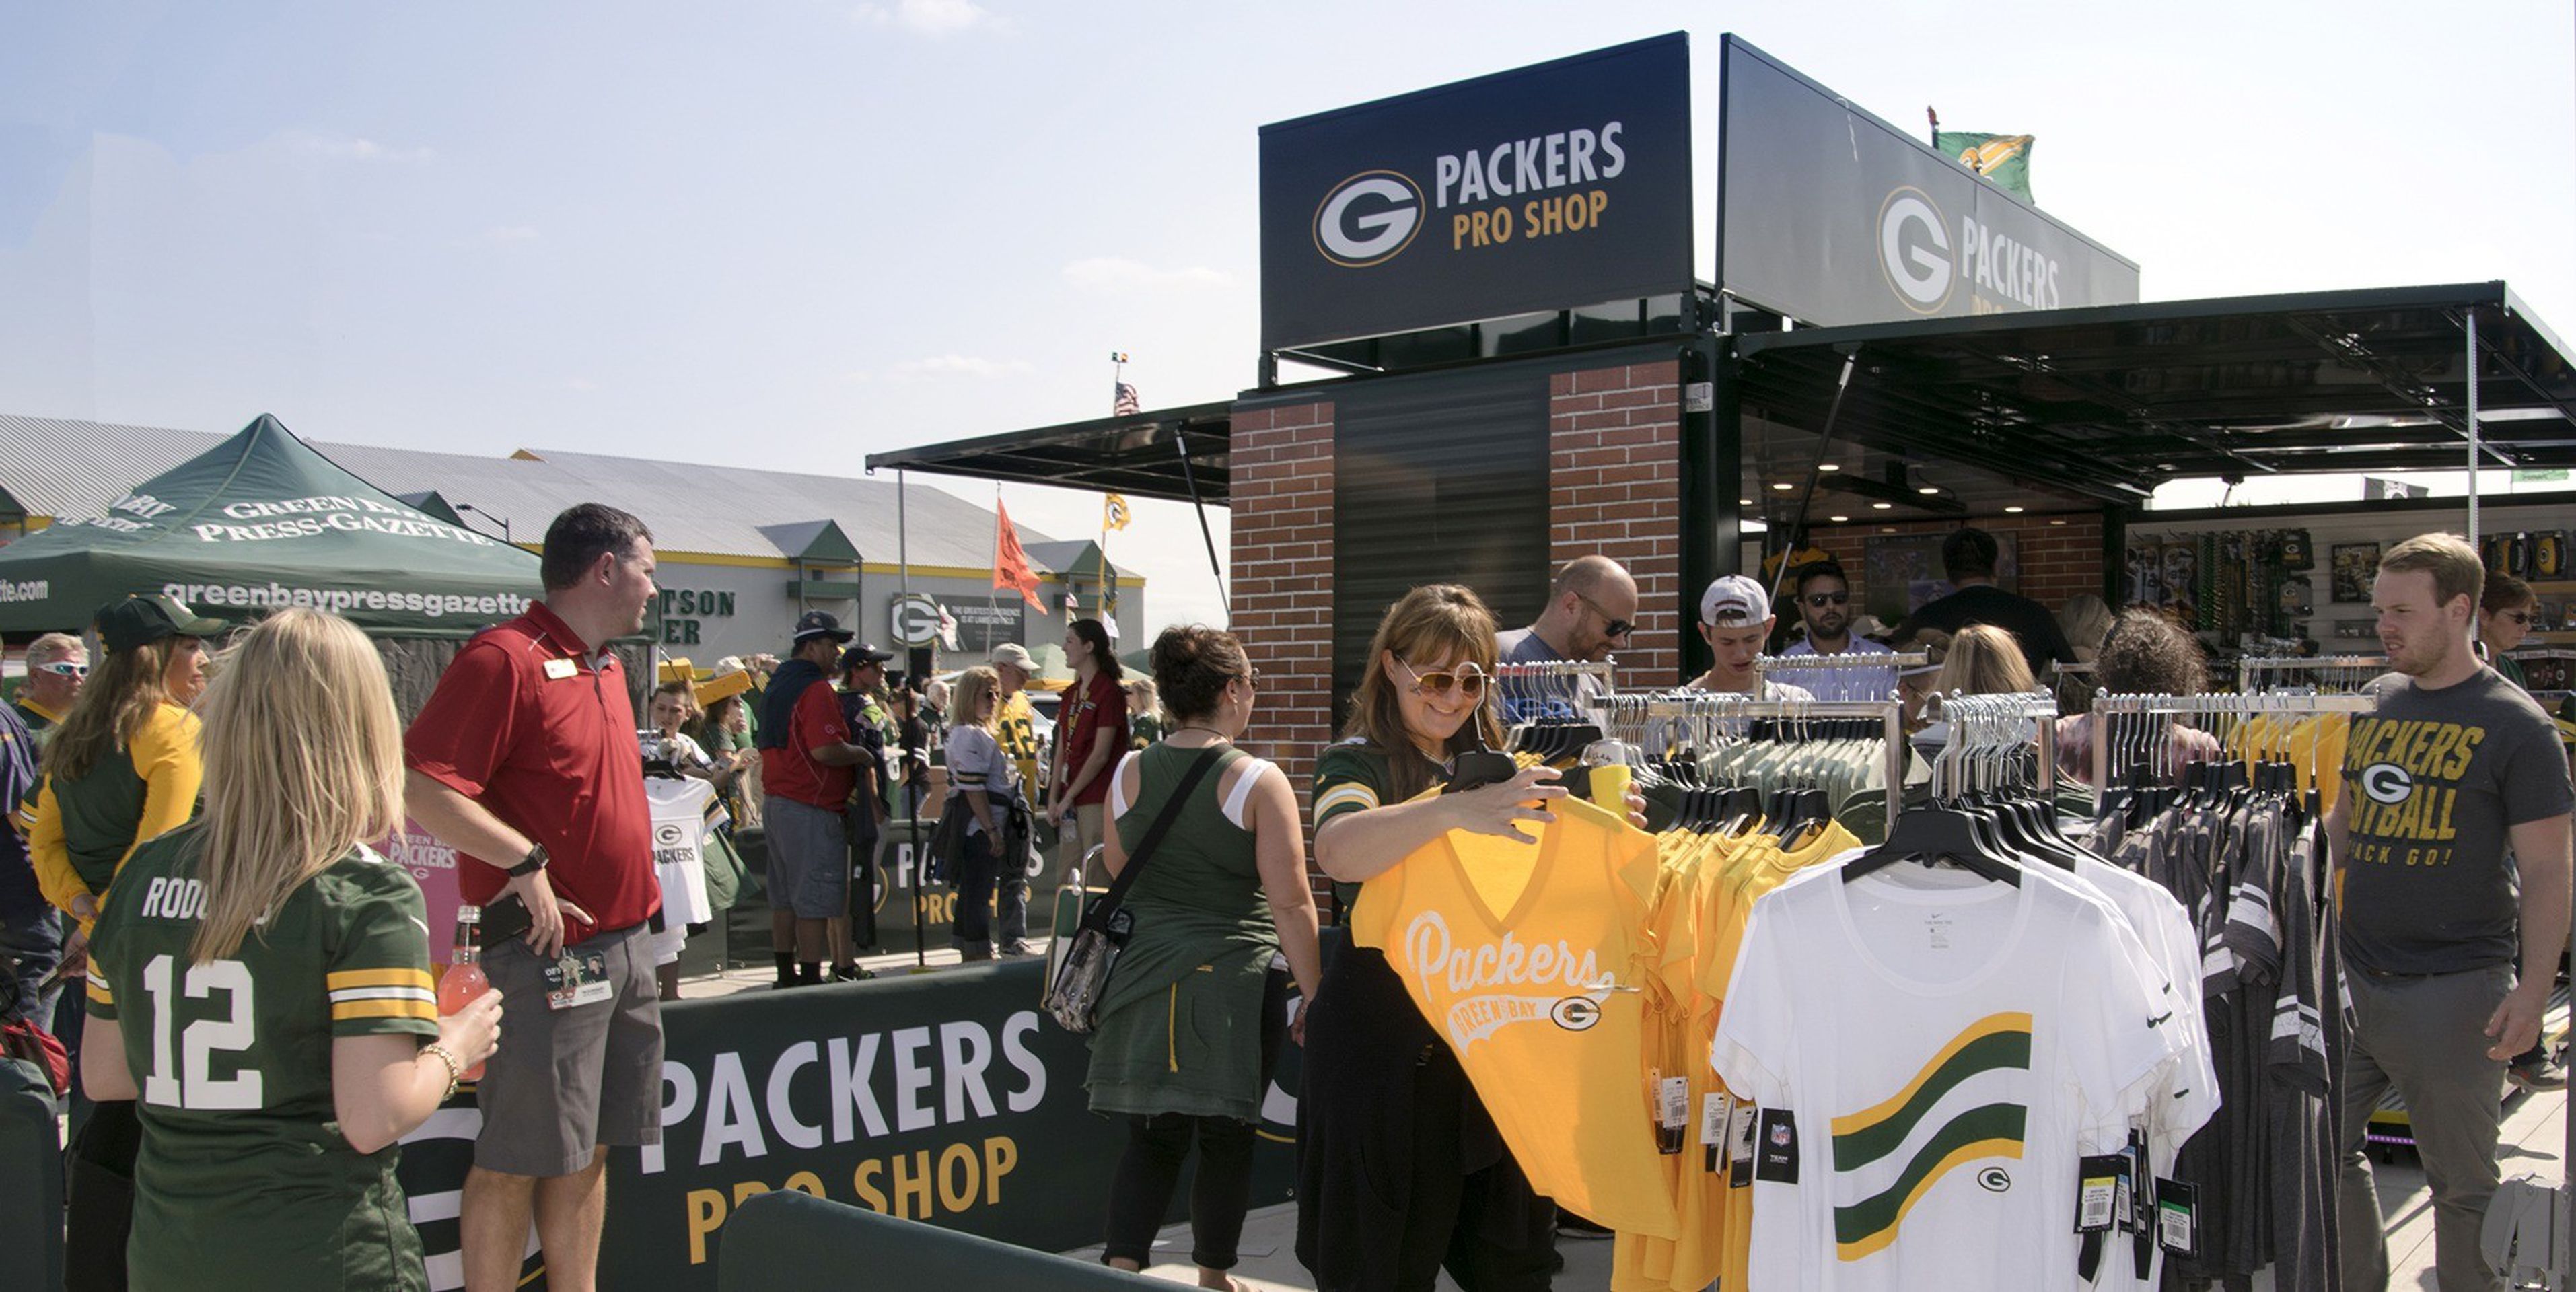 Green Bay Packers Pro Shop Sporting Event in Green Bay WI The Vendry